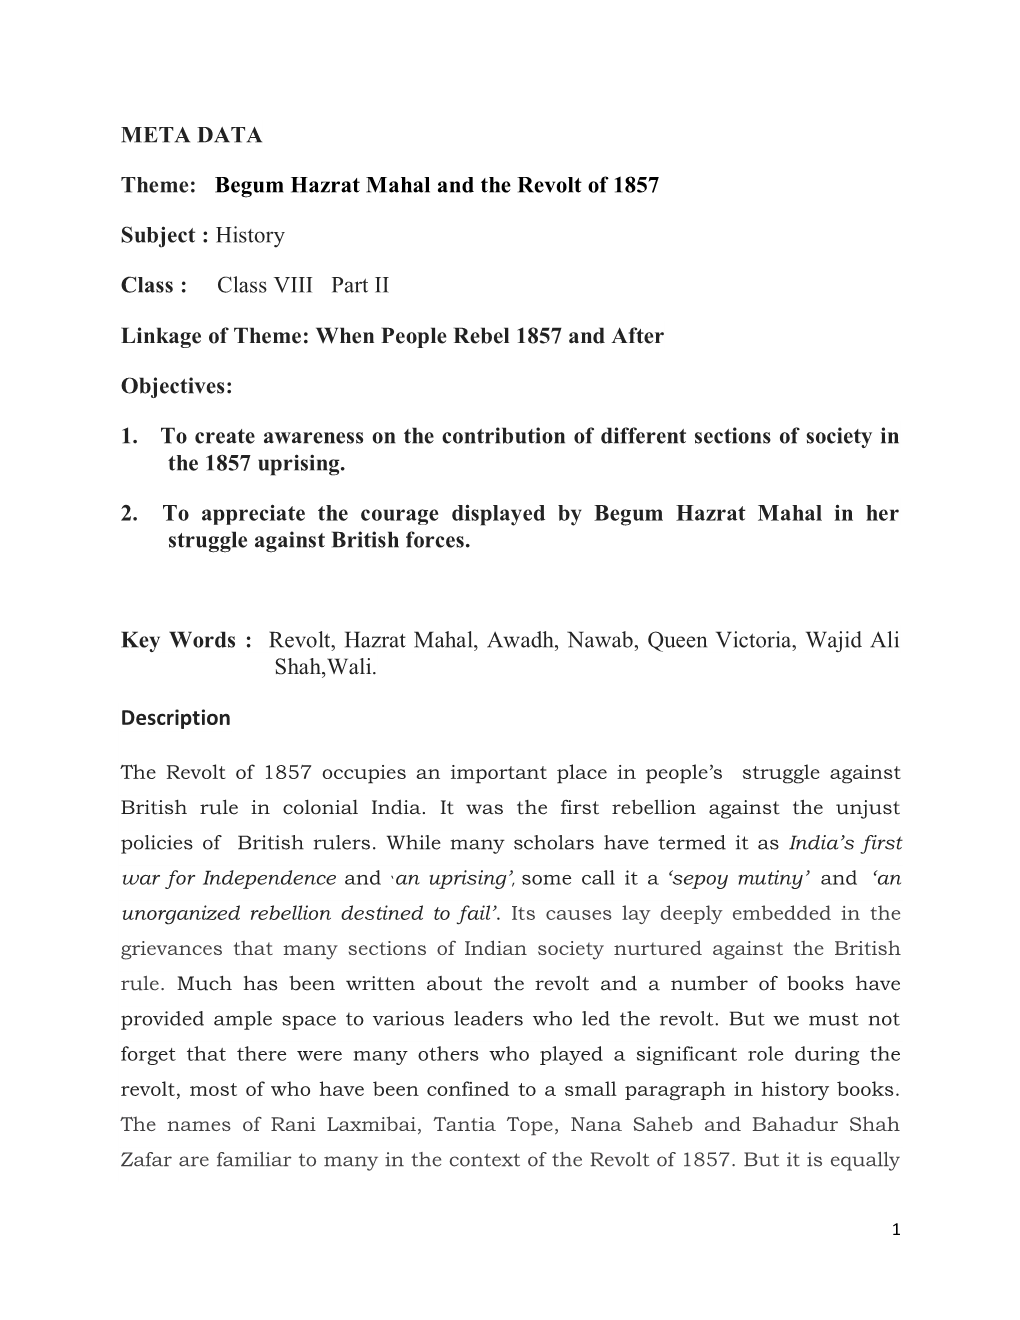 Begum Hazrat Mahal and the Revolt of 1857 Subject